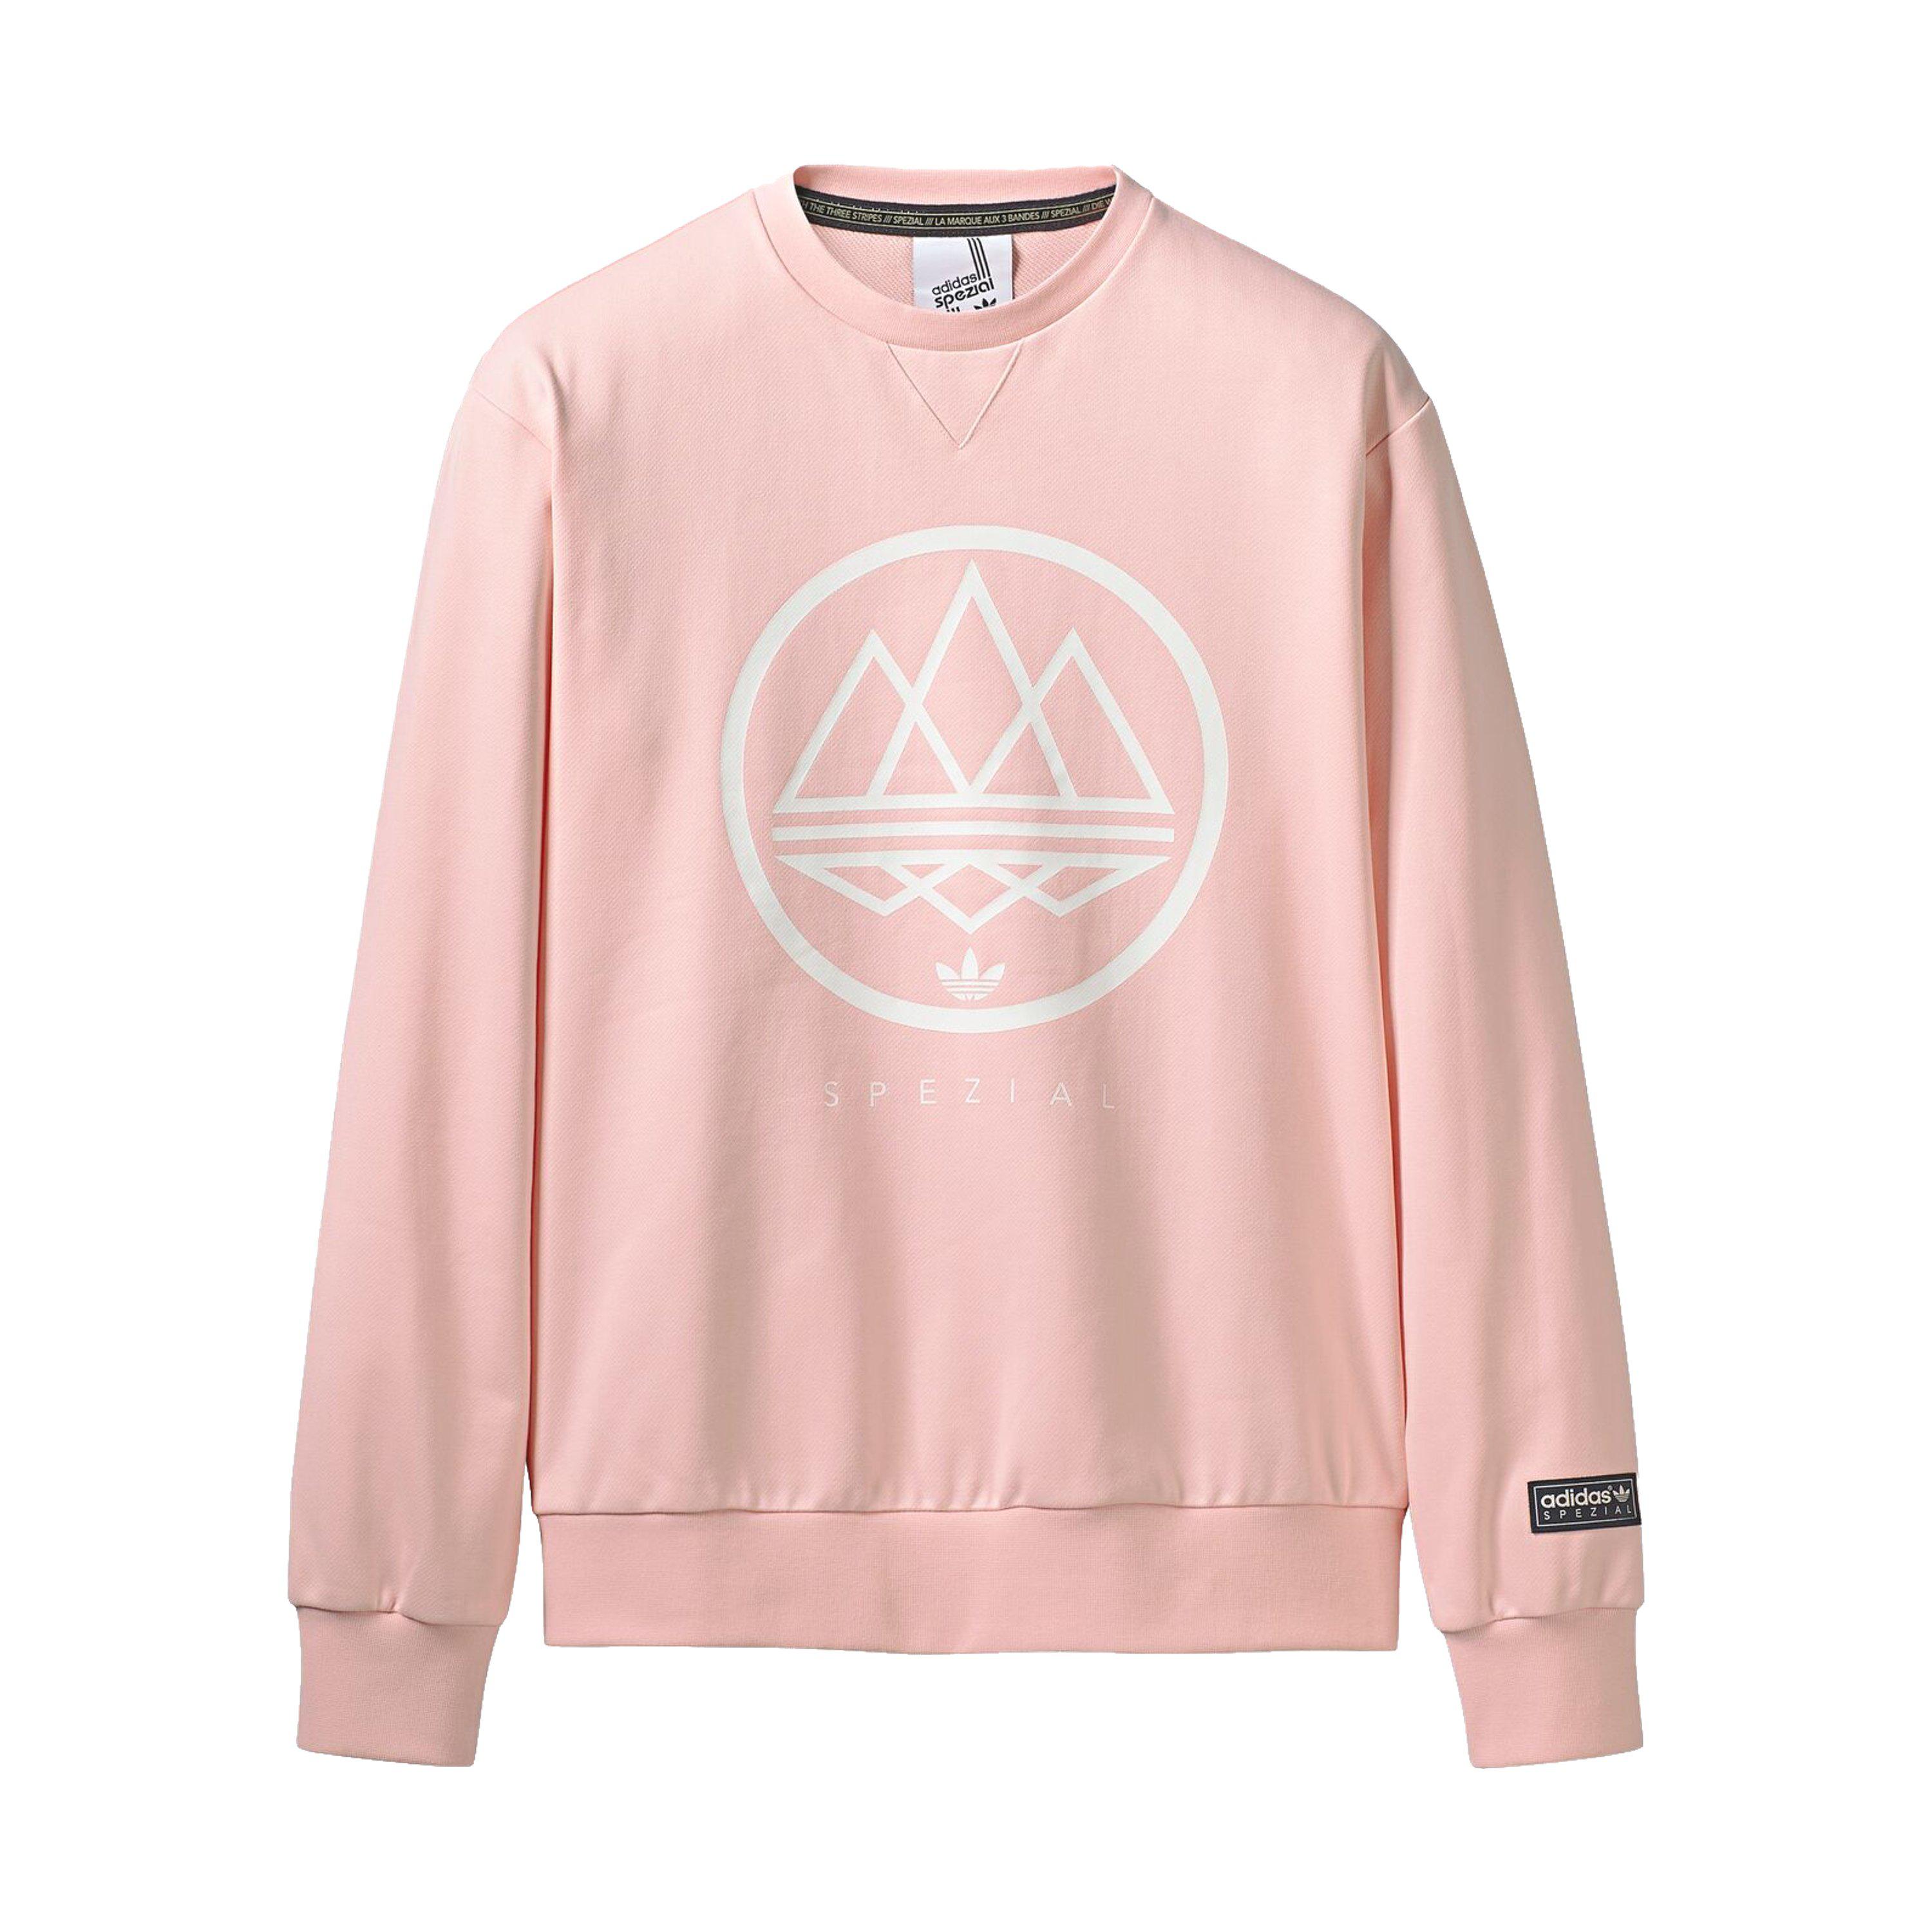 Adidas Spezial Pink Sweatshirt Italy, SAVE 44% - aveclumiere.com